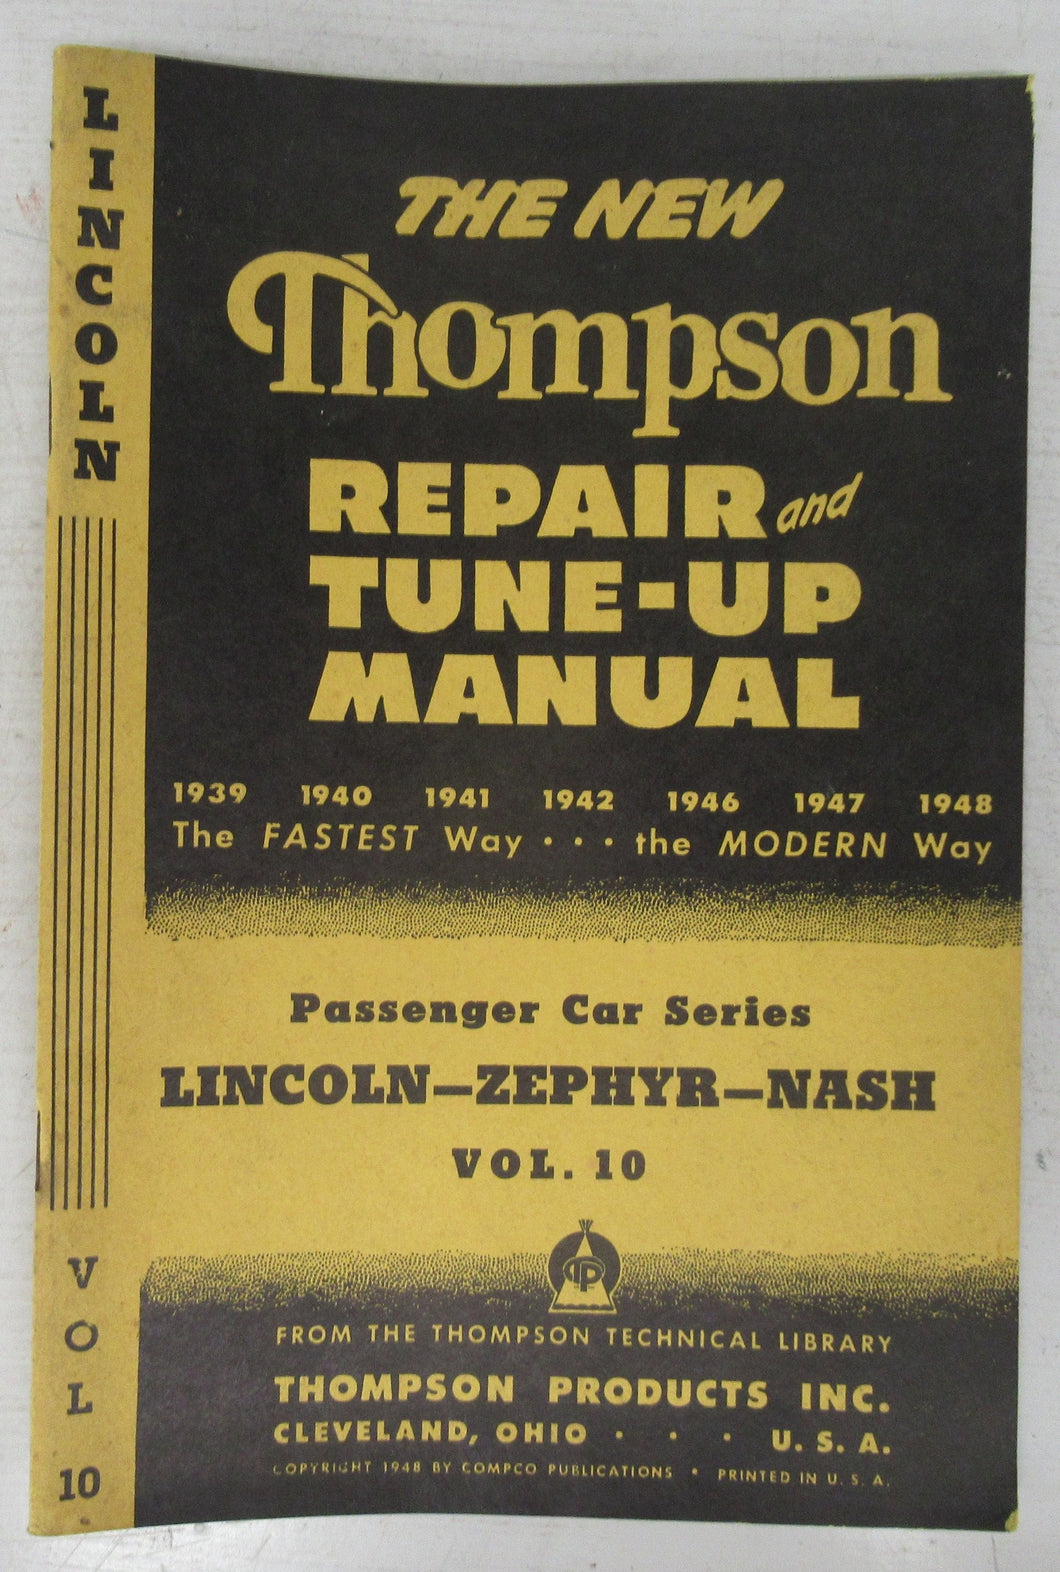 The New Thompson Repair and Tune-Up Manual Passenger Car Series: Vol. 10.  Lincoln-Zephyr-Nash